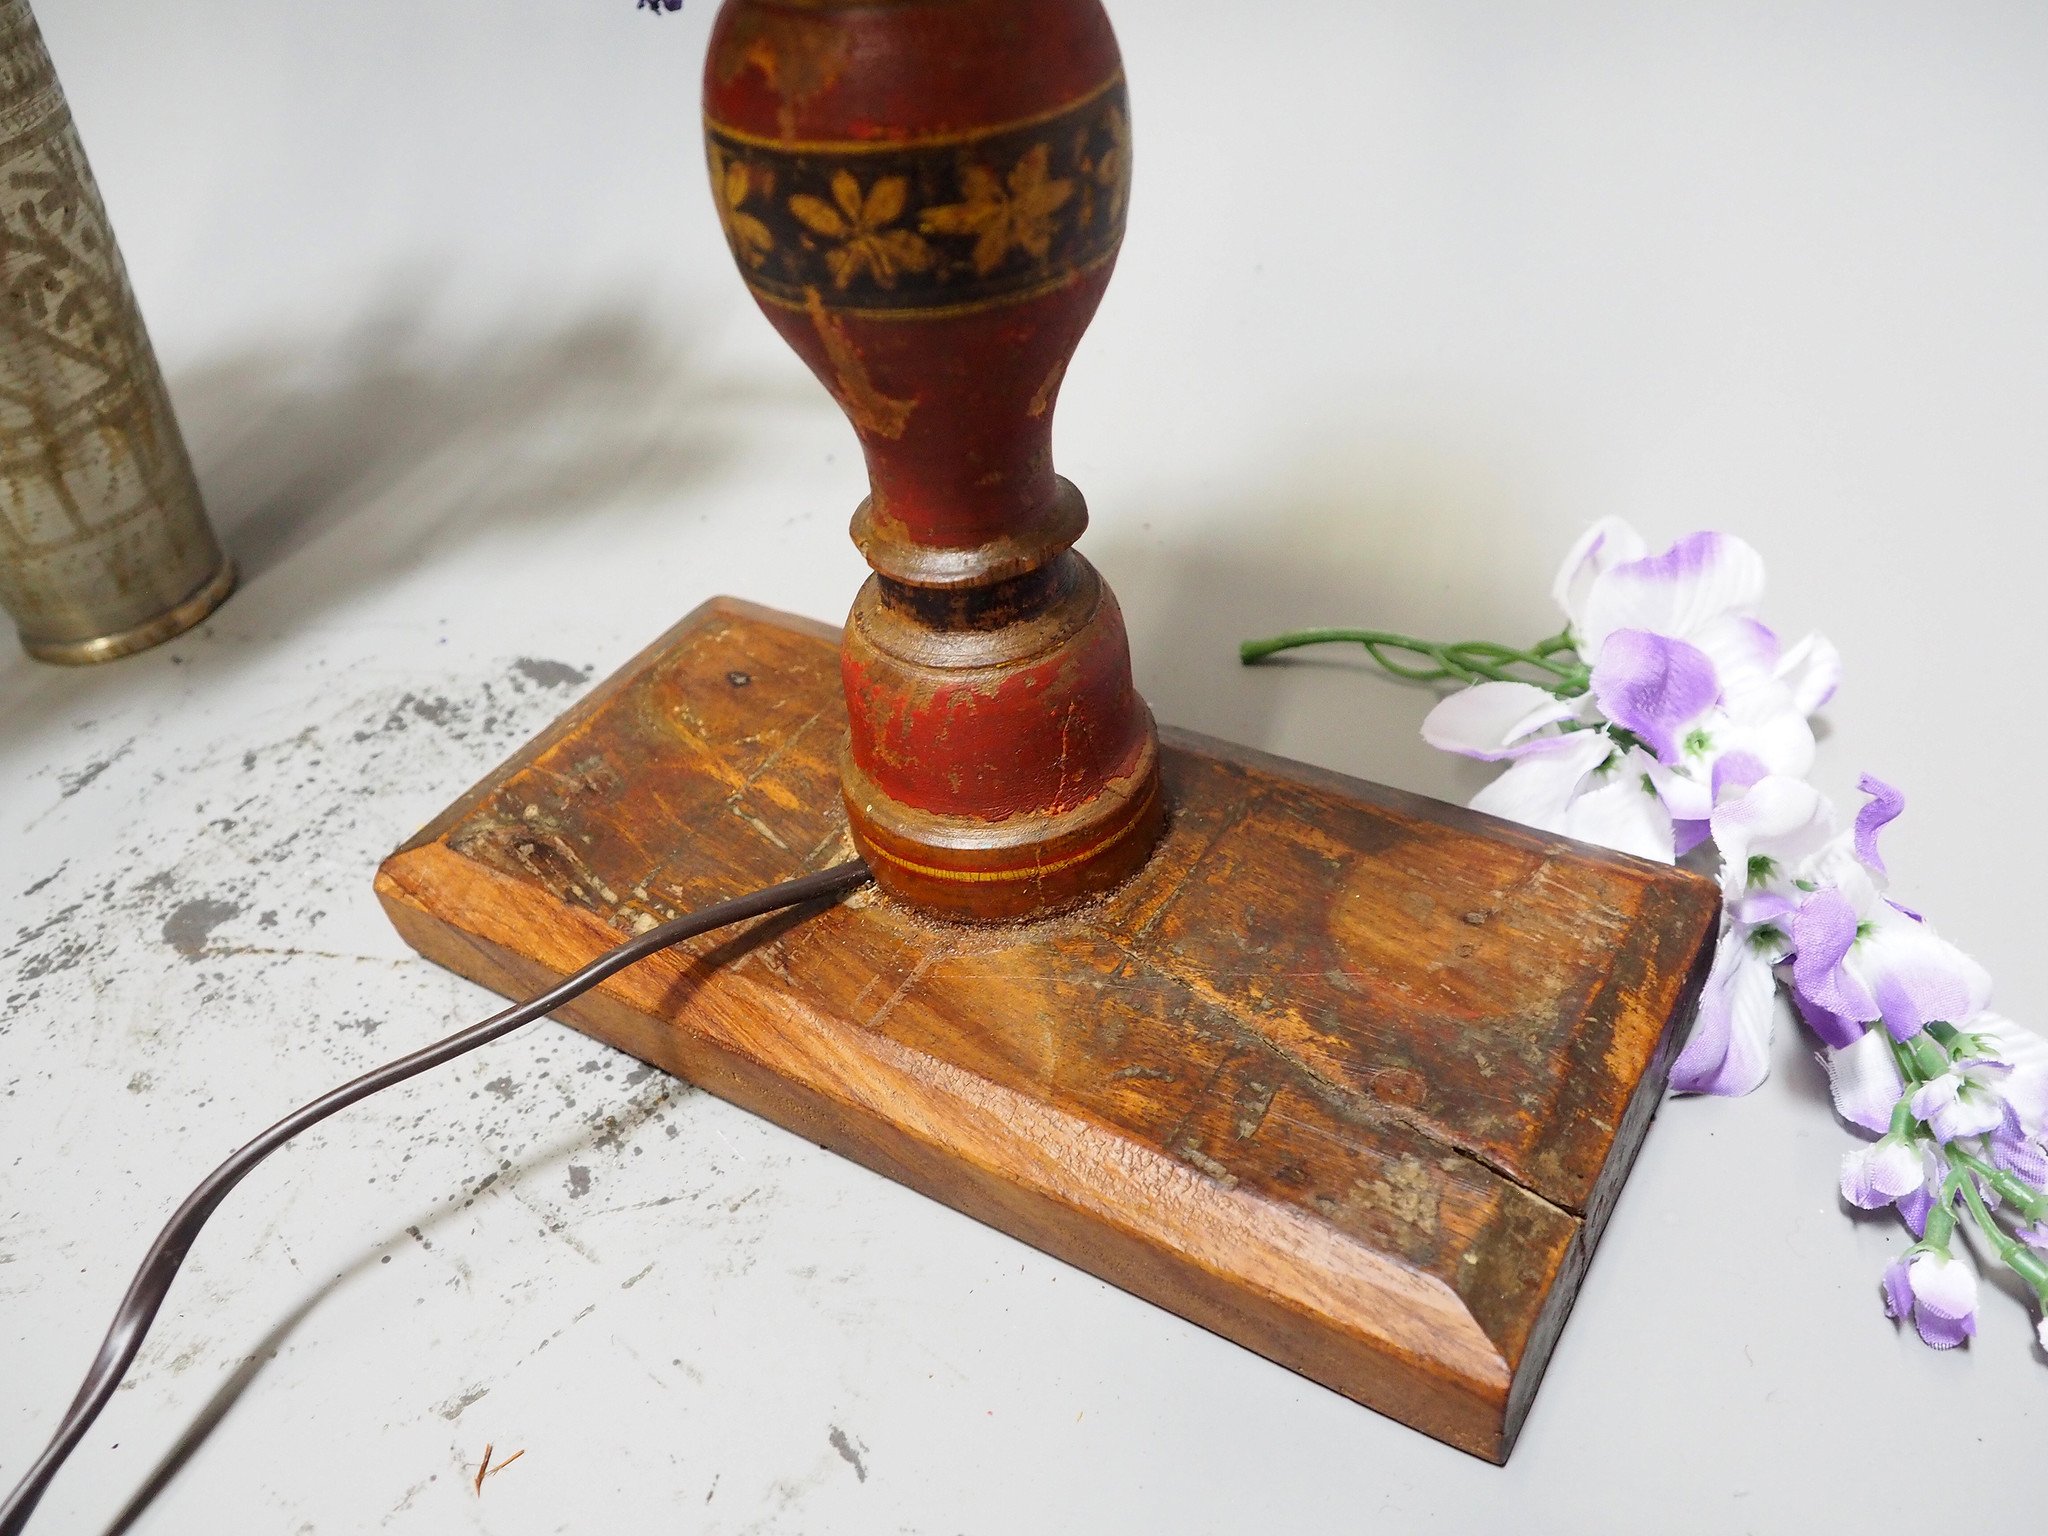 Antique handpainted stunning Vintage Lacquerware wooden Table Lamp with Vintage light fitting from Afghanistan / Pakistan No:21/2